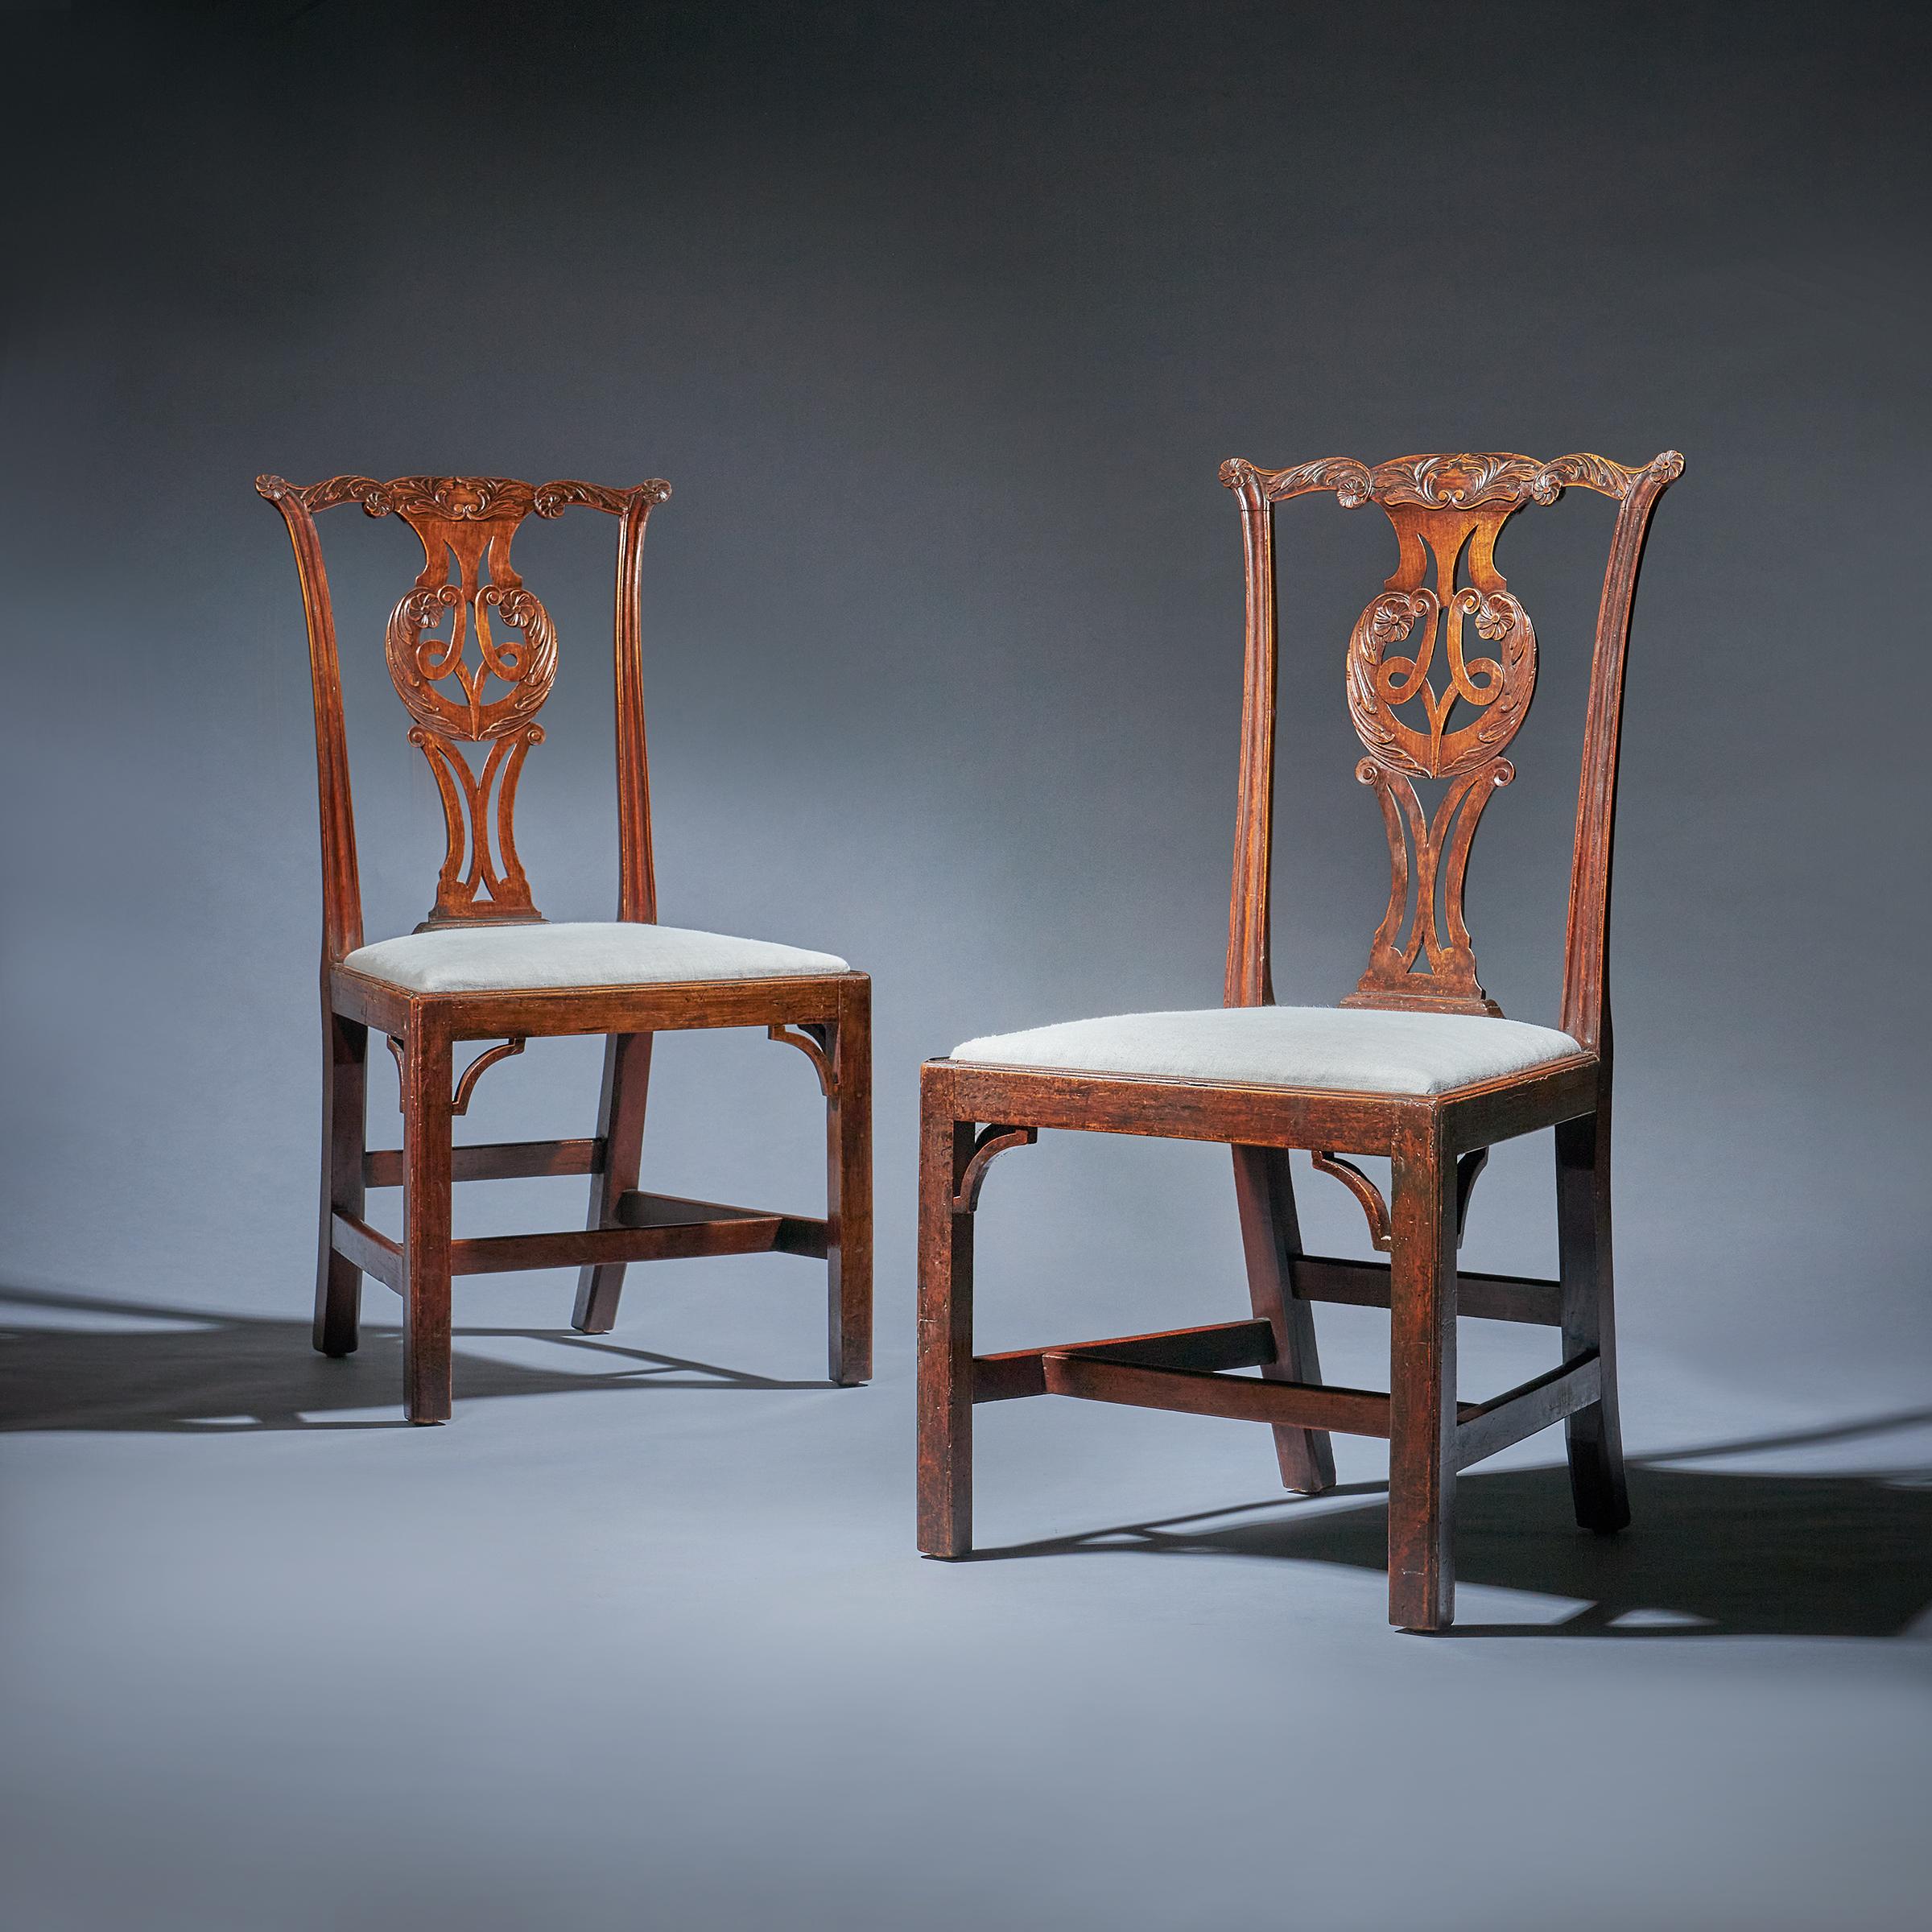 A fabulous and rare pair of George III cherry wood chairs in original 'Country House' Condition, Circa 1760-1770. 

The carved cresting rail is decorated with soft sweeping carved acanthus leaves and centred by a cartouche. 

The splat, of